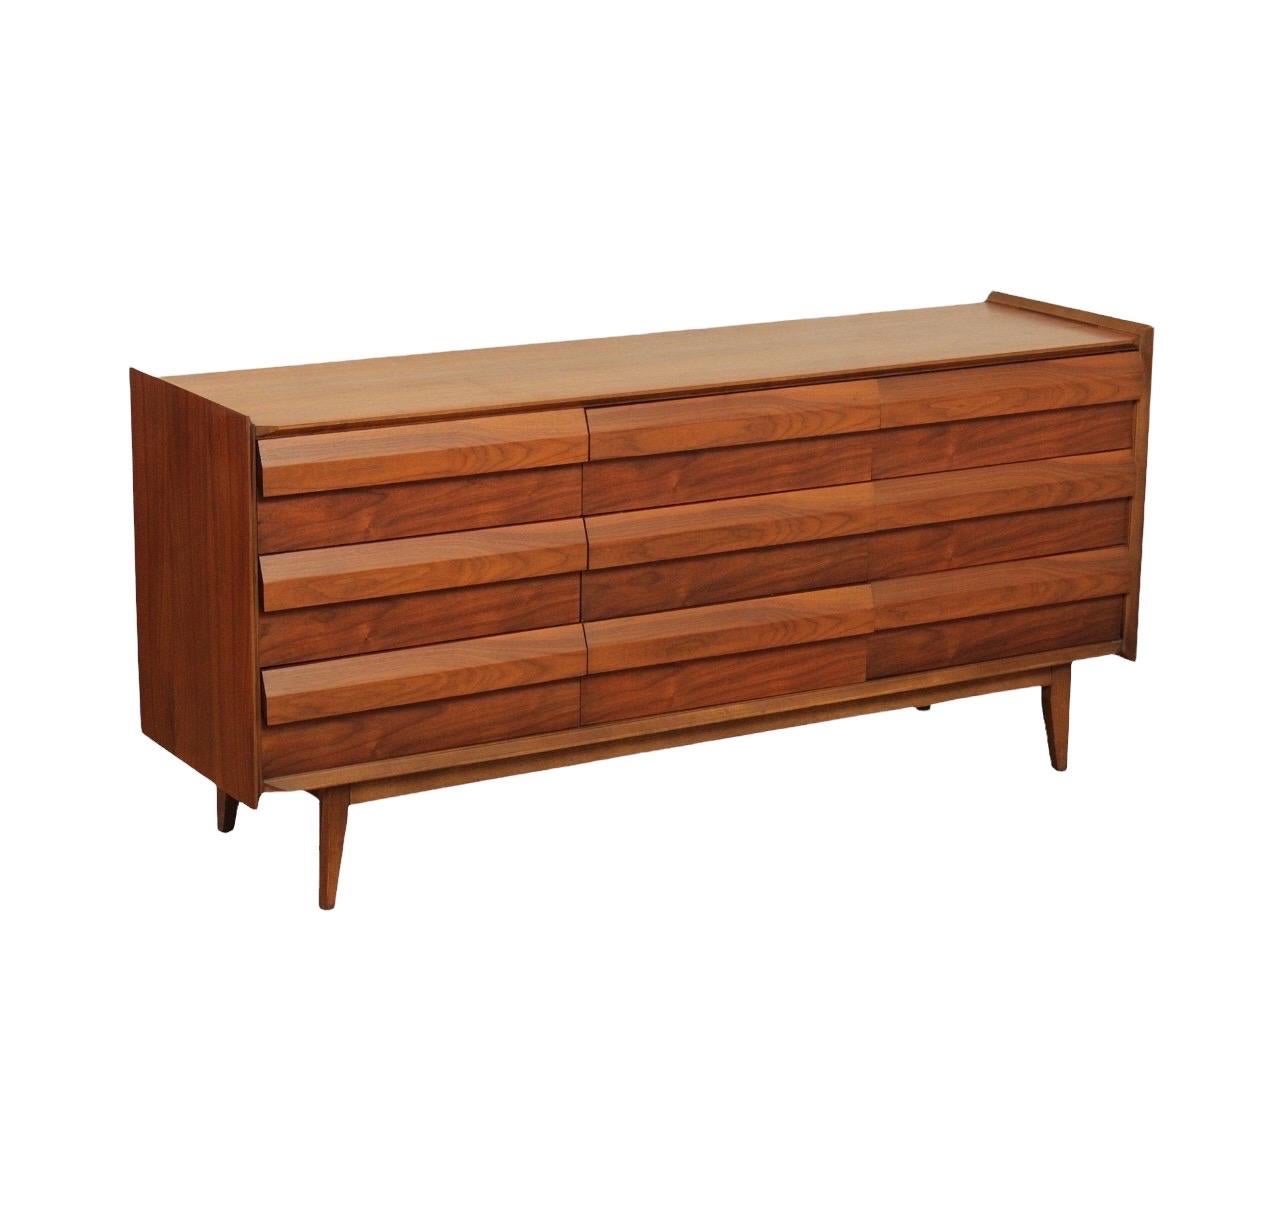 We have a beautiful mid-century dresser set available. The set has clean-lines and looks very sophisticated. 
 
 The set includes a lowboy and two endtables.

Lowboy dimensions: 66